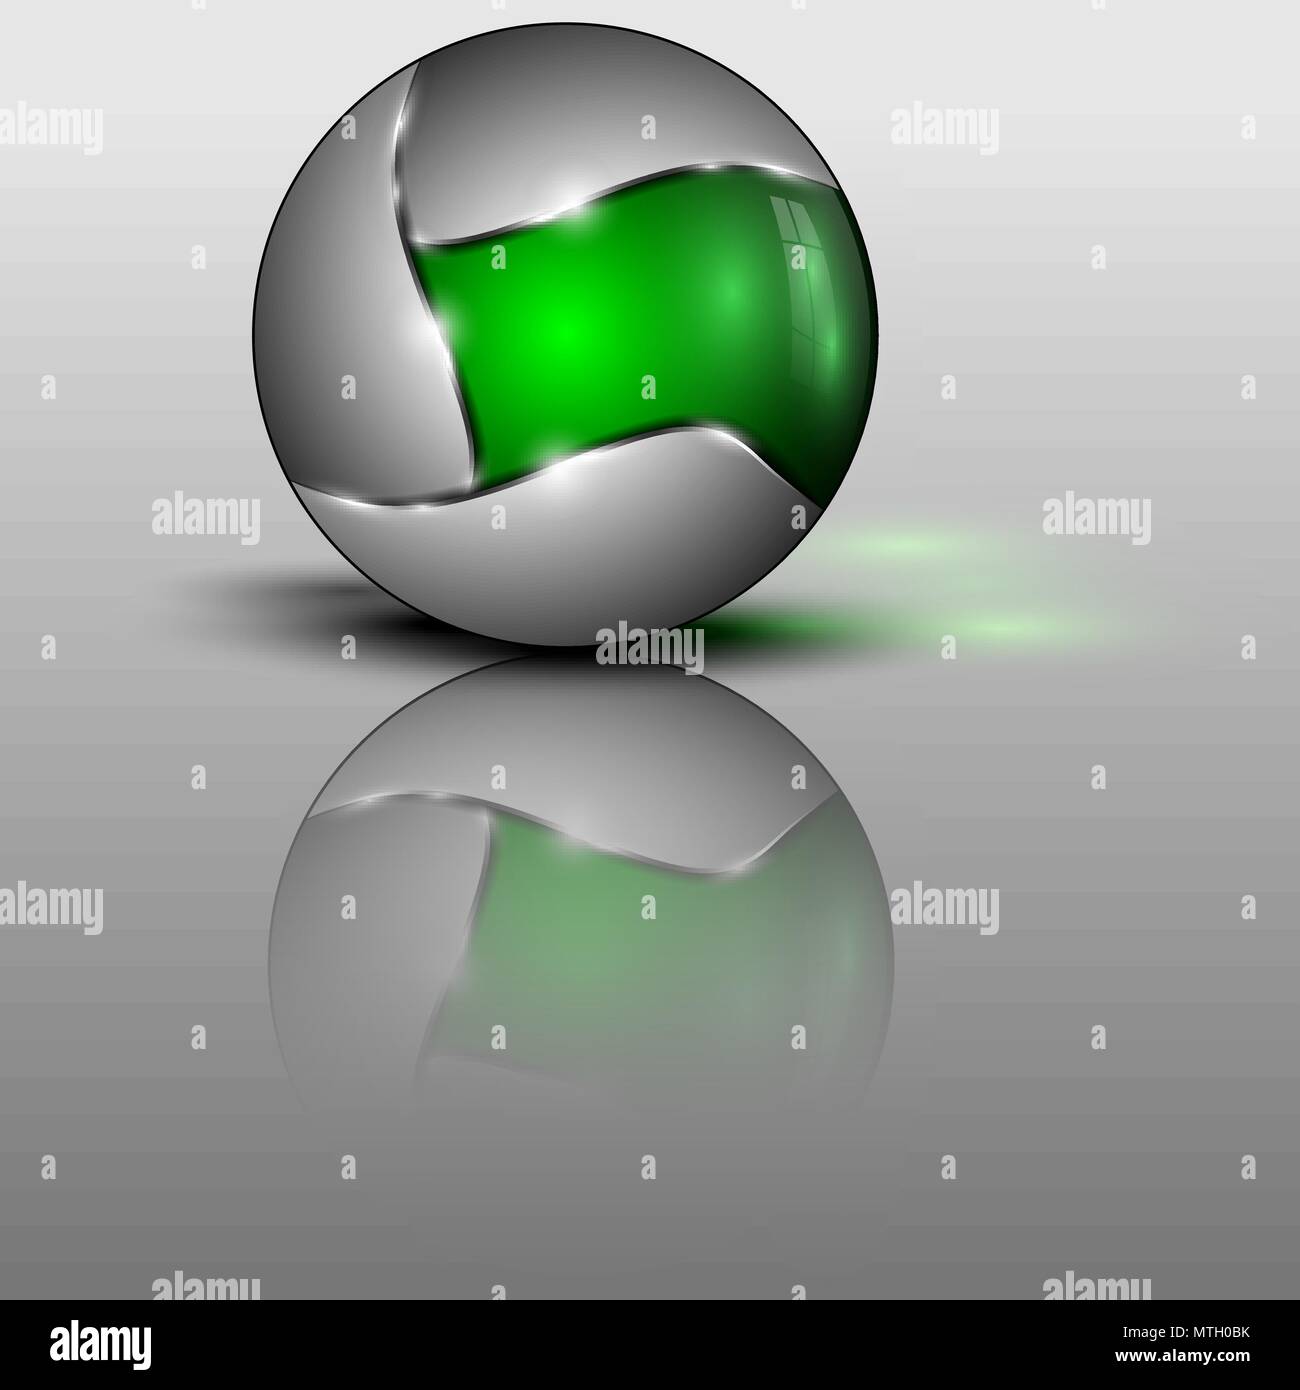 Vector illustration of green colorful sphere as emblem Stock Vector